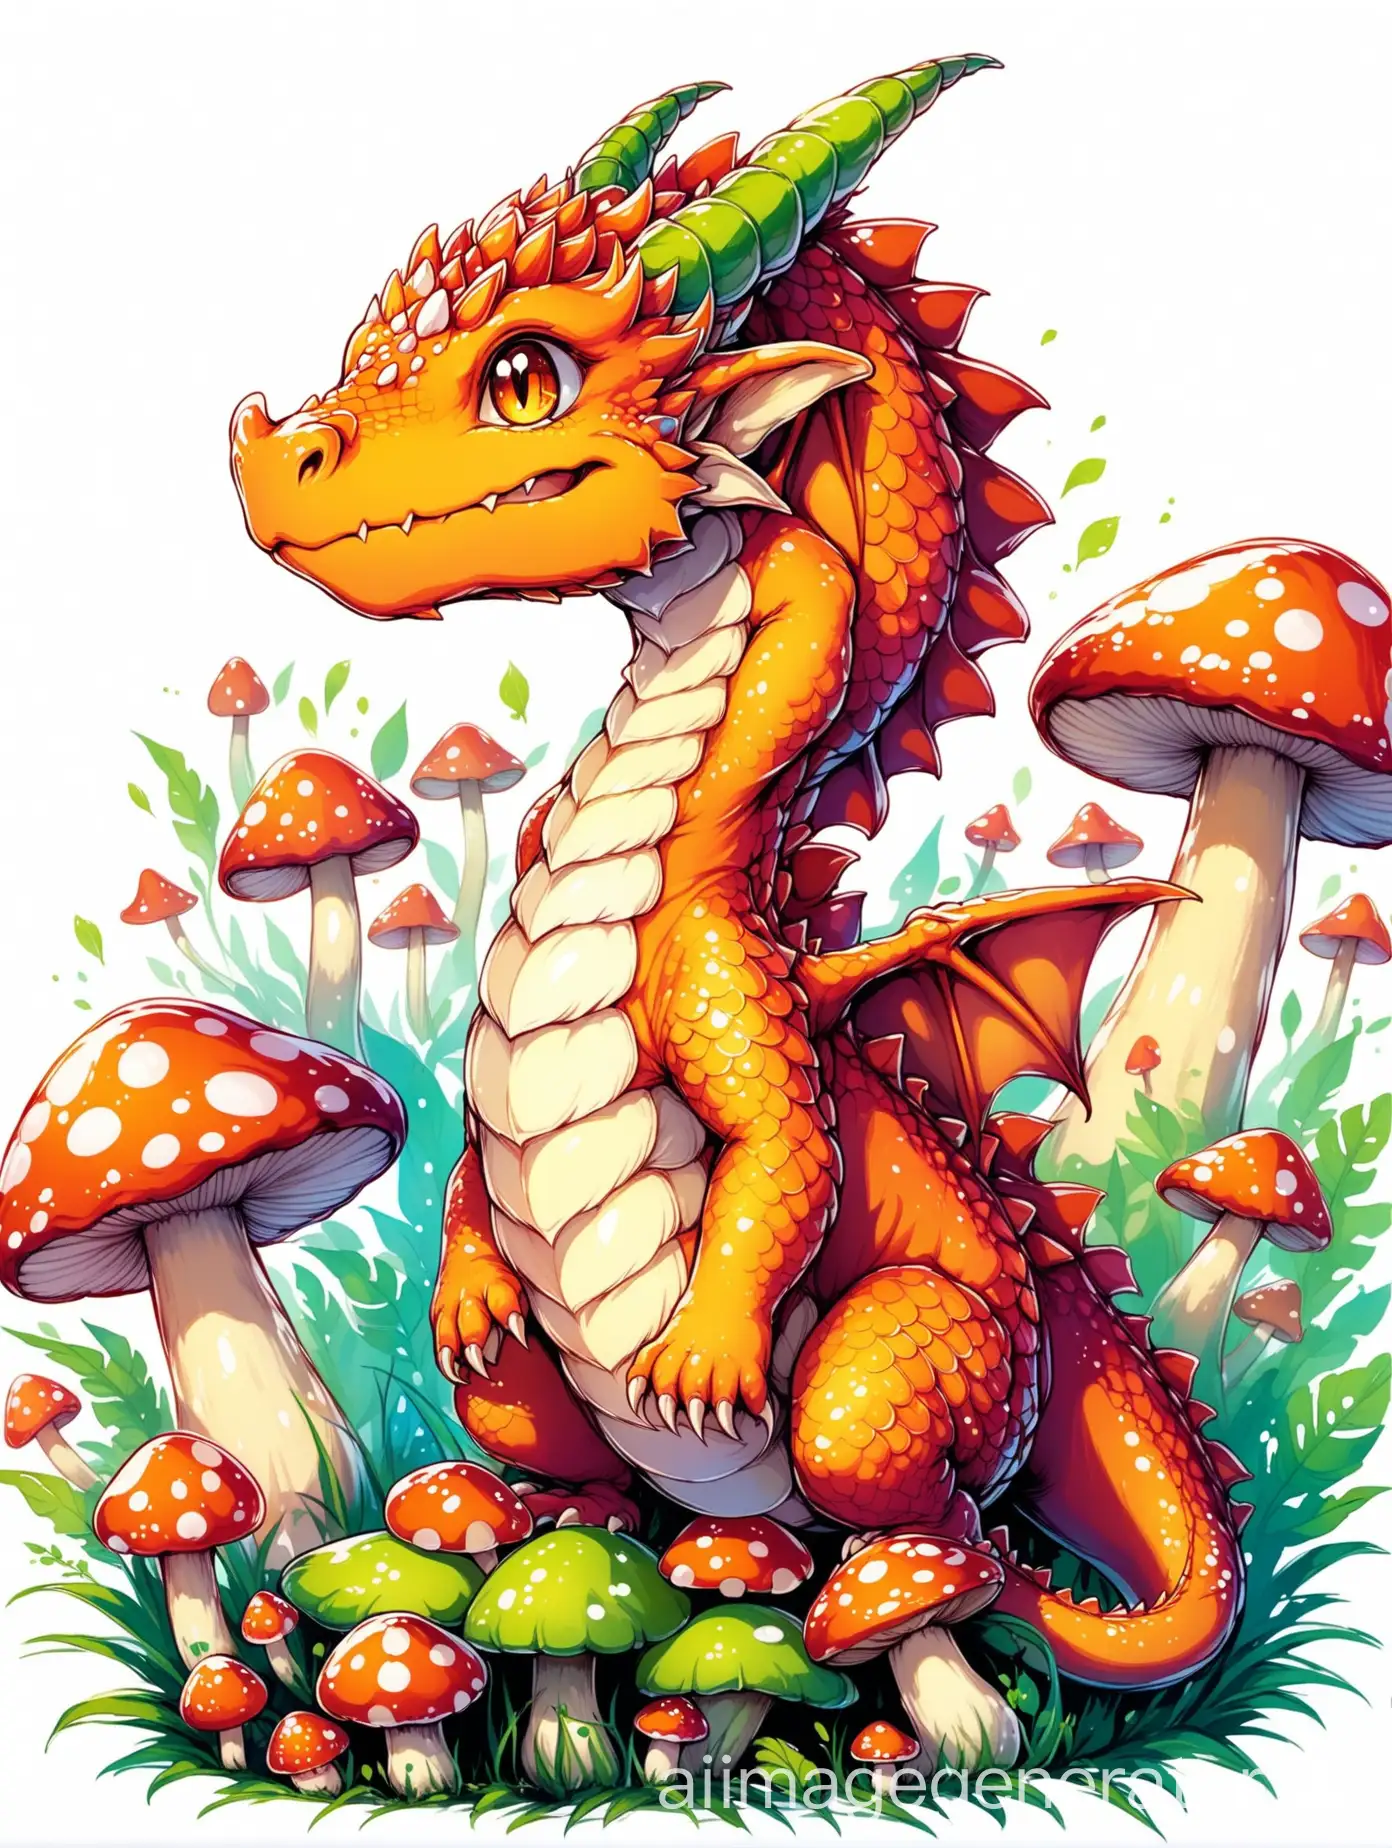 small dragon next to mushrooms, colorful drawing on white background, high quality